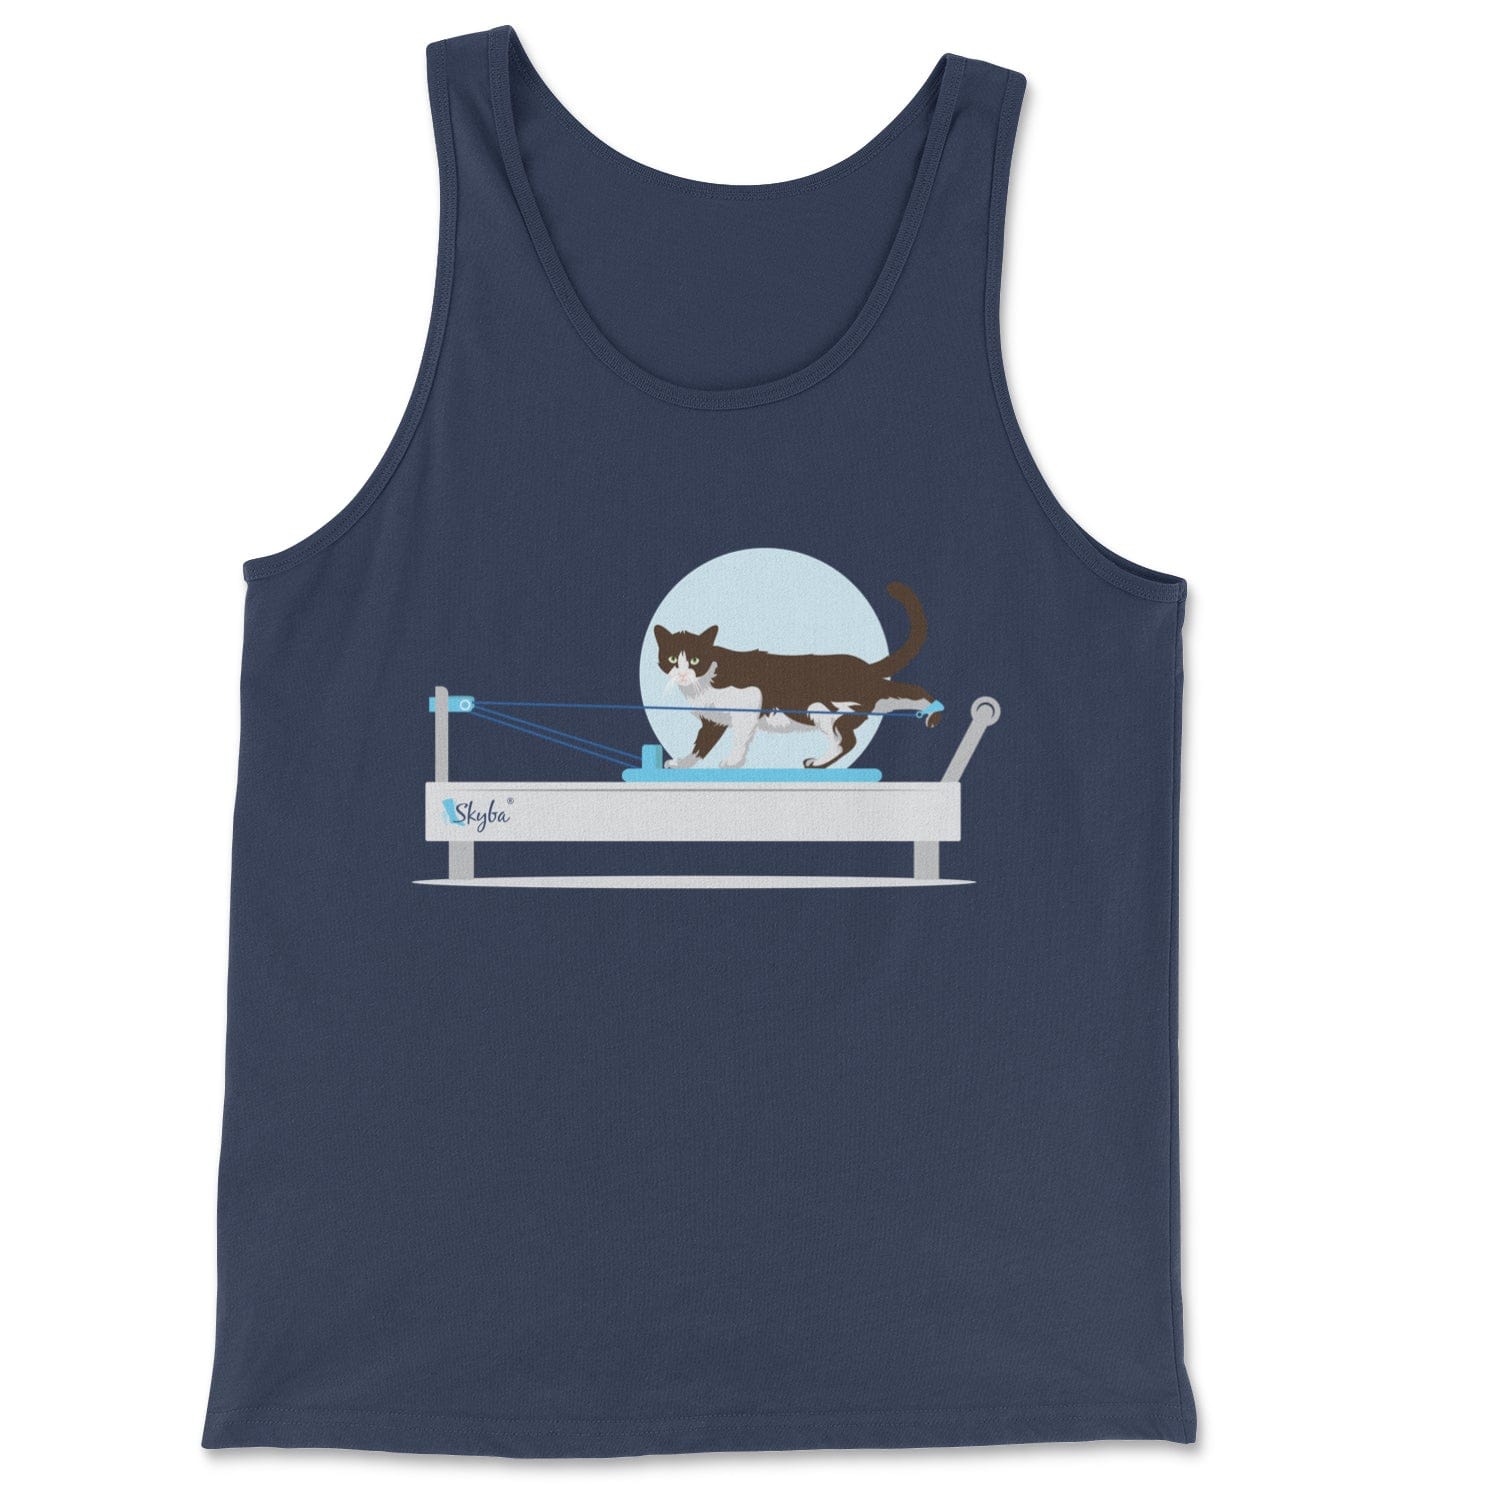 Moonlit Cat on the Reformer - Classic Tank Skyba Print Material